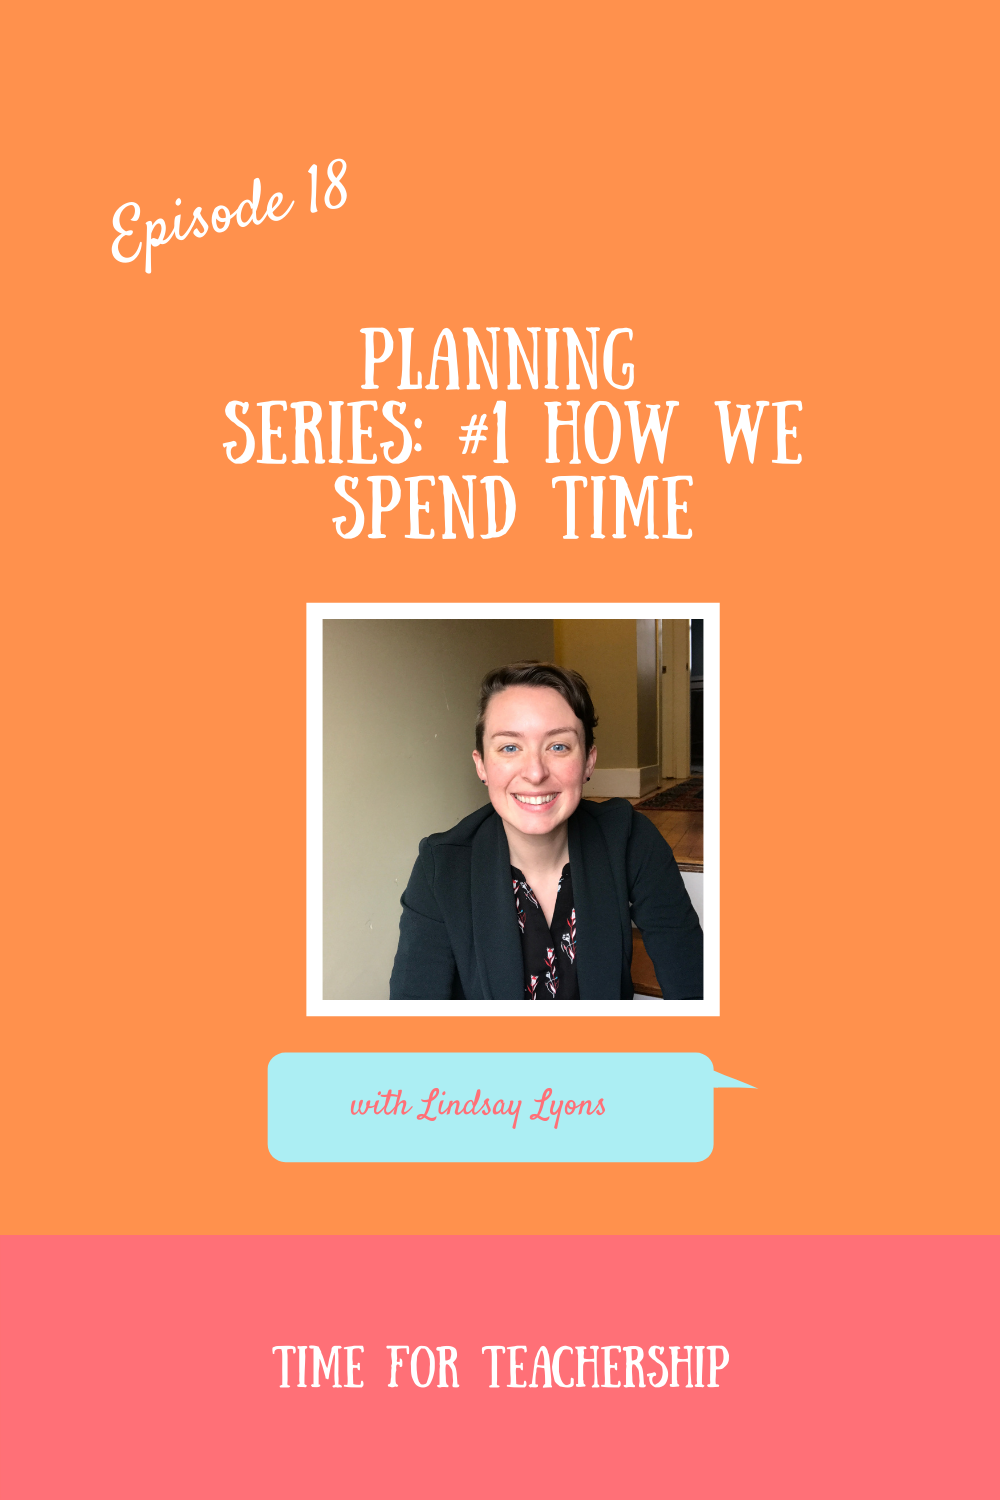 18. Planning Series Part 1-How do you spend your time? In this solo show, Lindsay brings a highly effective strategy to the table as a way to replace the previous time-consuming methods that weren't getting her the results she wanted. Check out the Time for Teachership blog post for a time-saving strategy and get one of my #teacherfreebies. For more tips and #teacherfreebies, sign up for weekly emails at bit.ly/lindsayletter